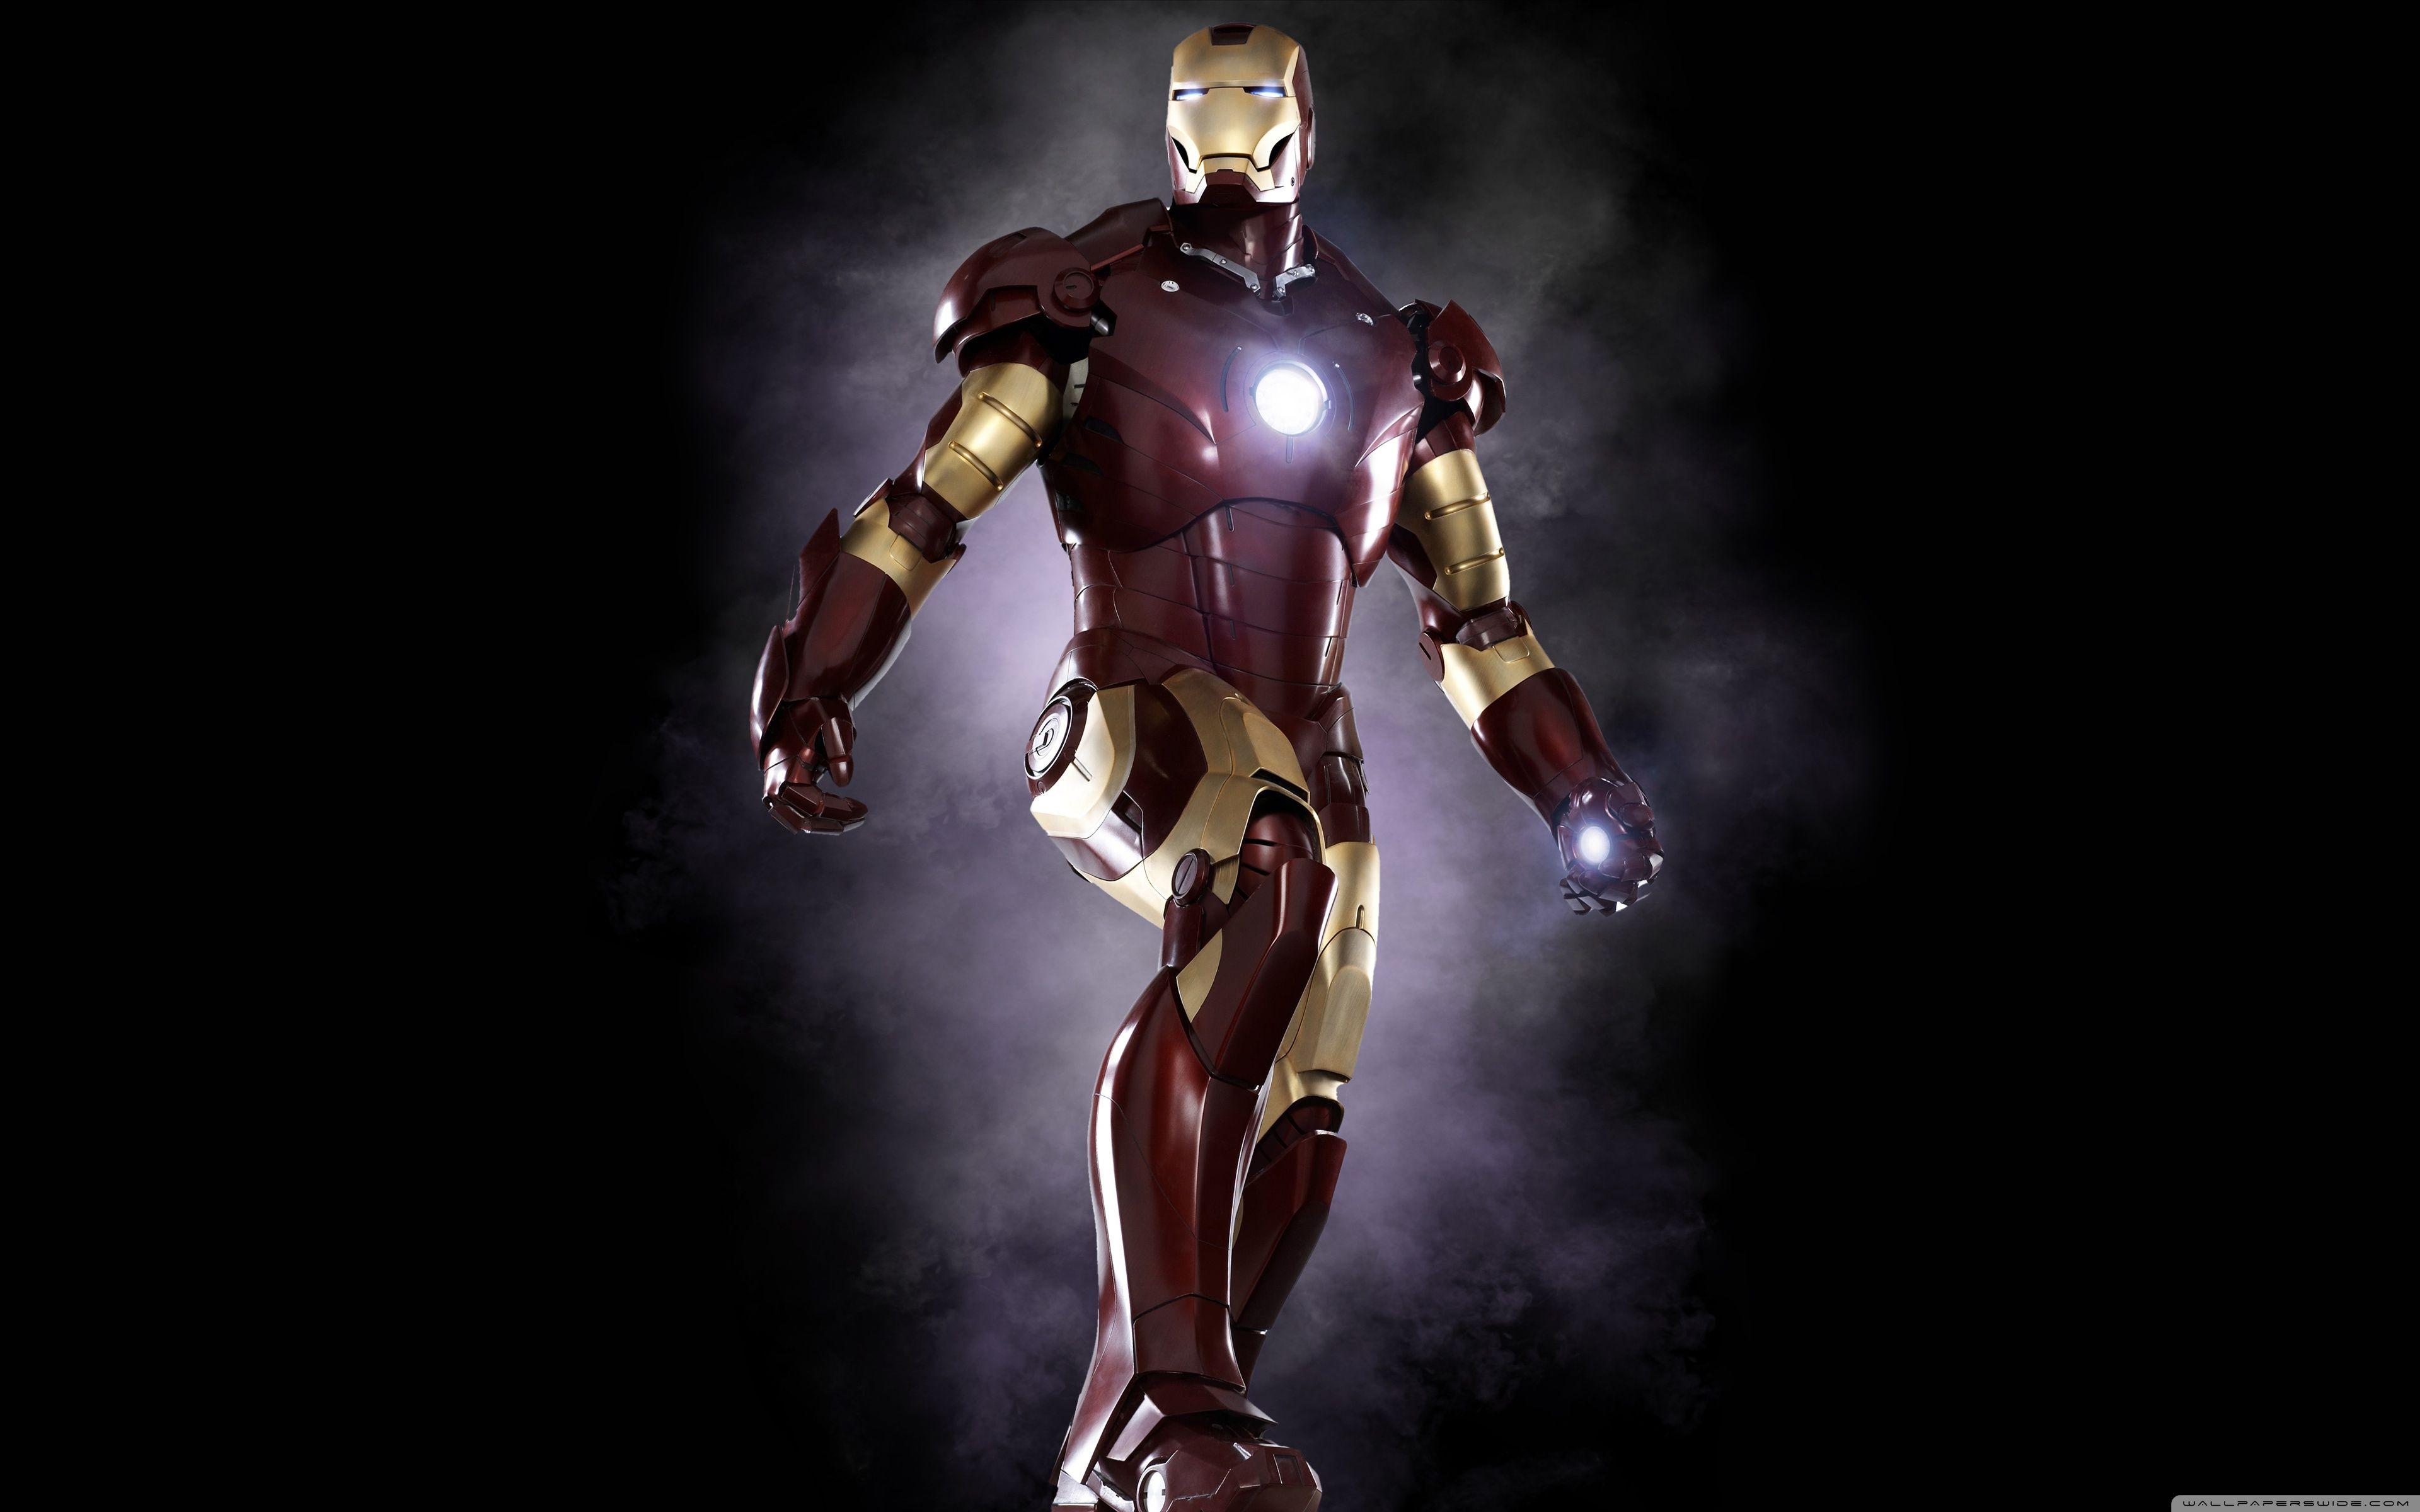 Iron Man Wallpaper Collection For Free Download. HD Wallpaper